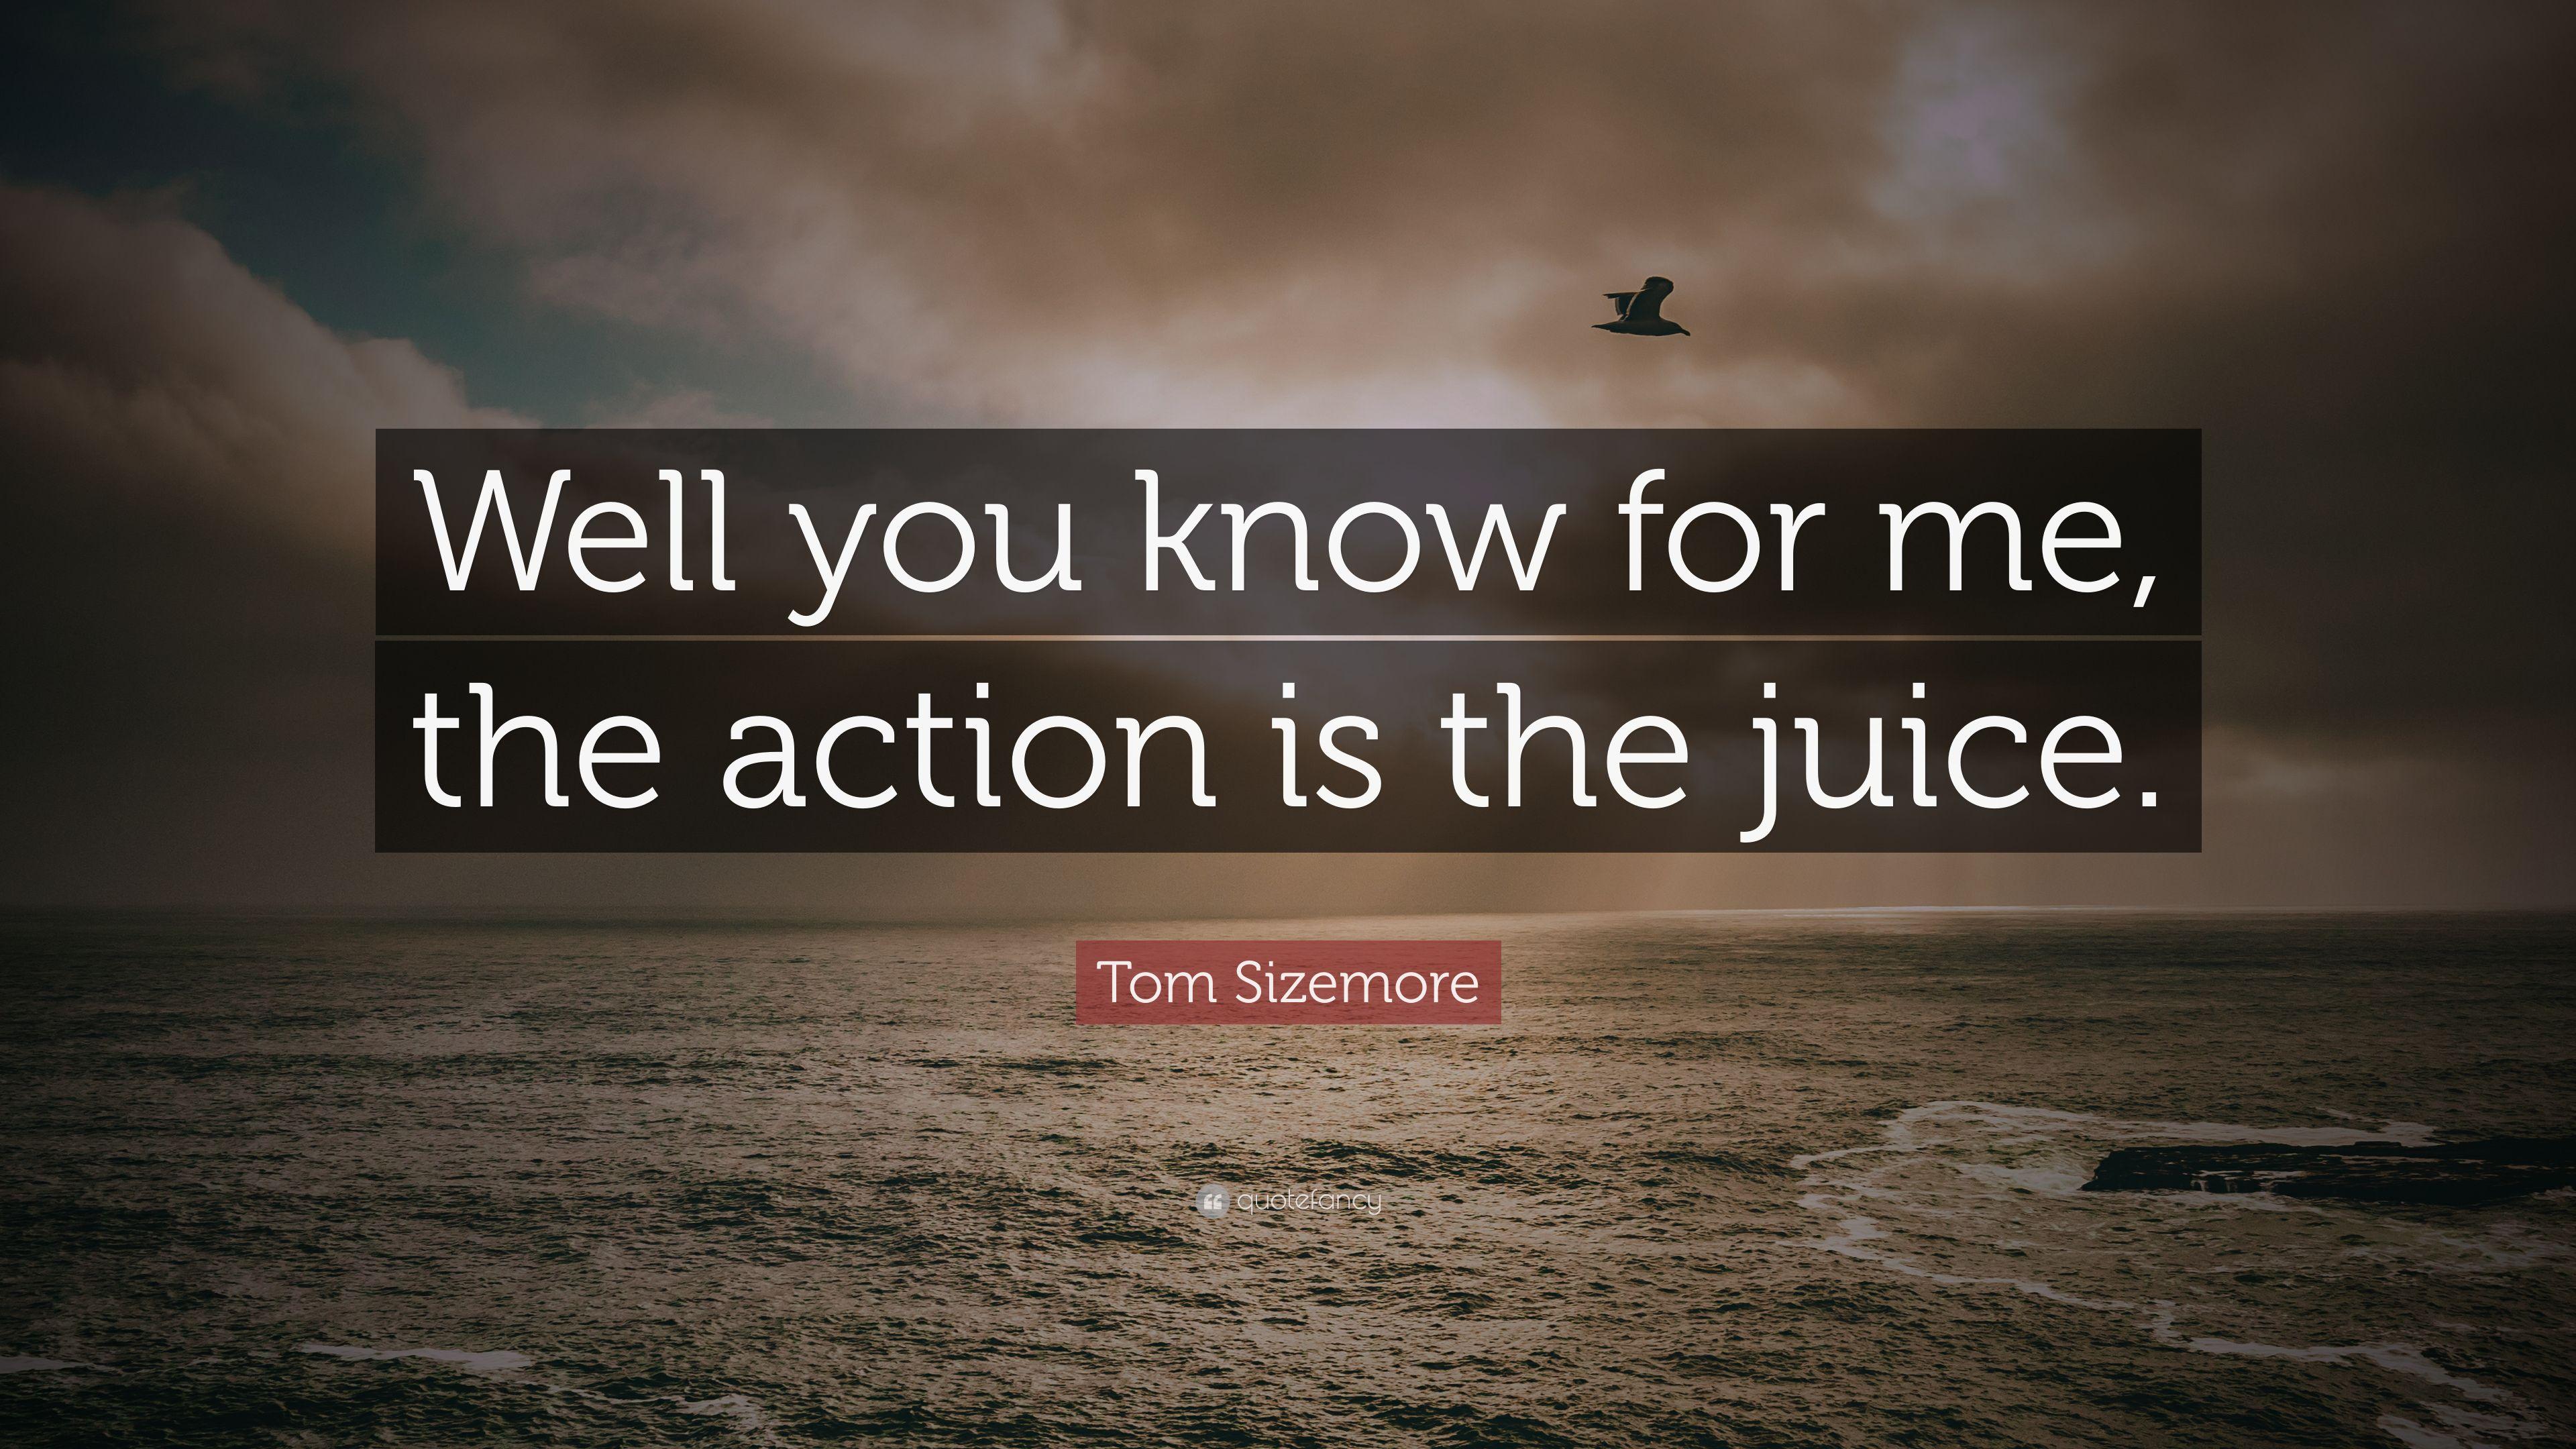 Tom Sizemore Quotes (30 wallpaper)